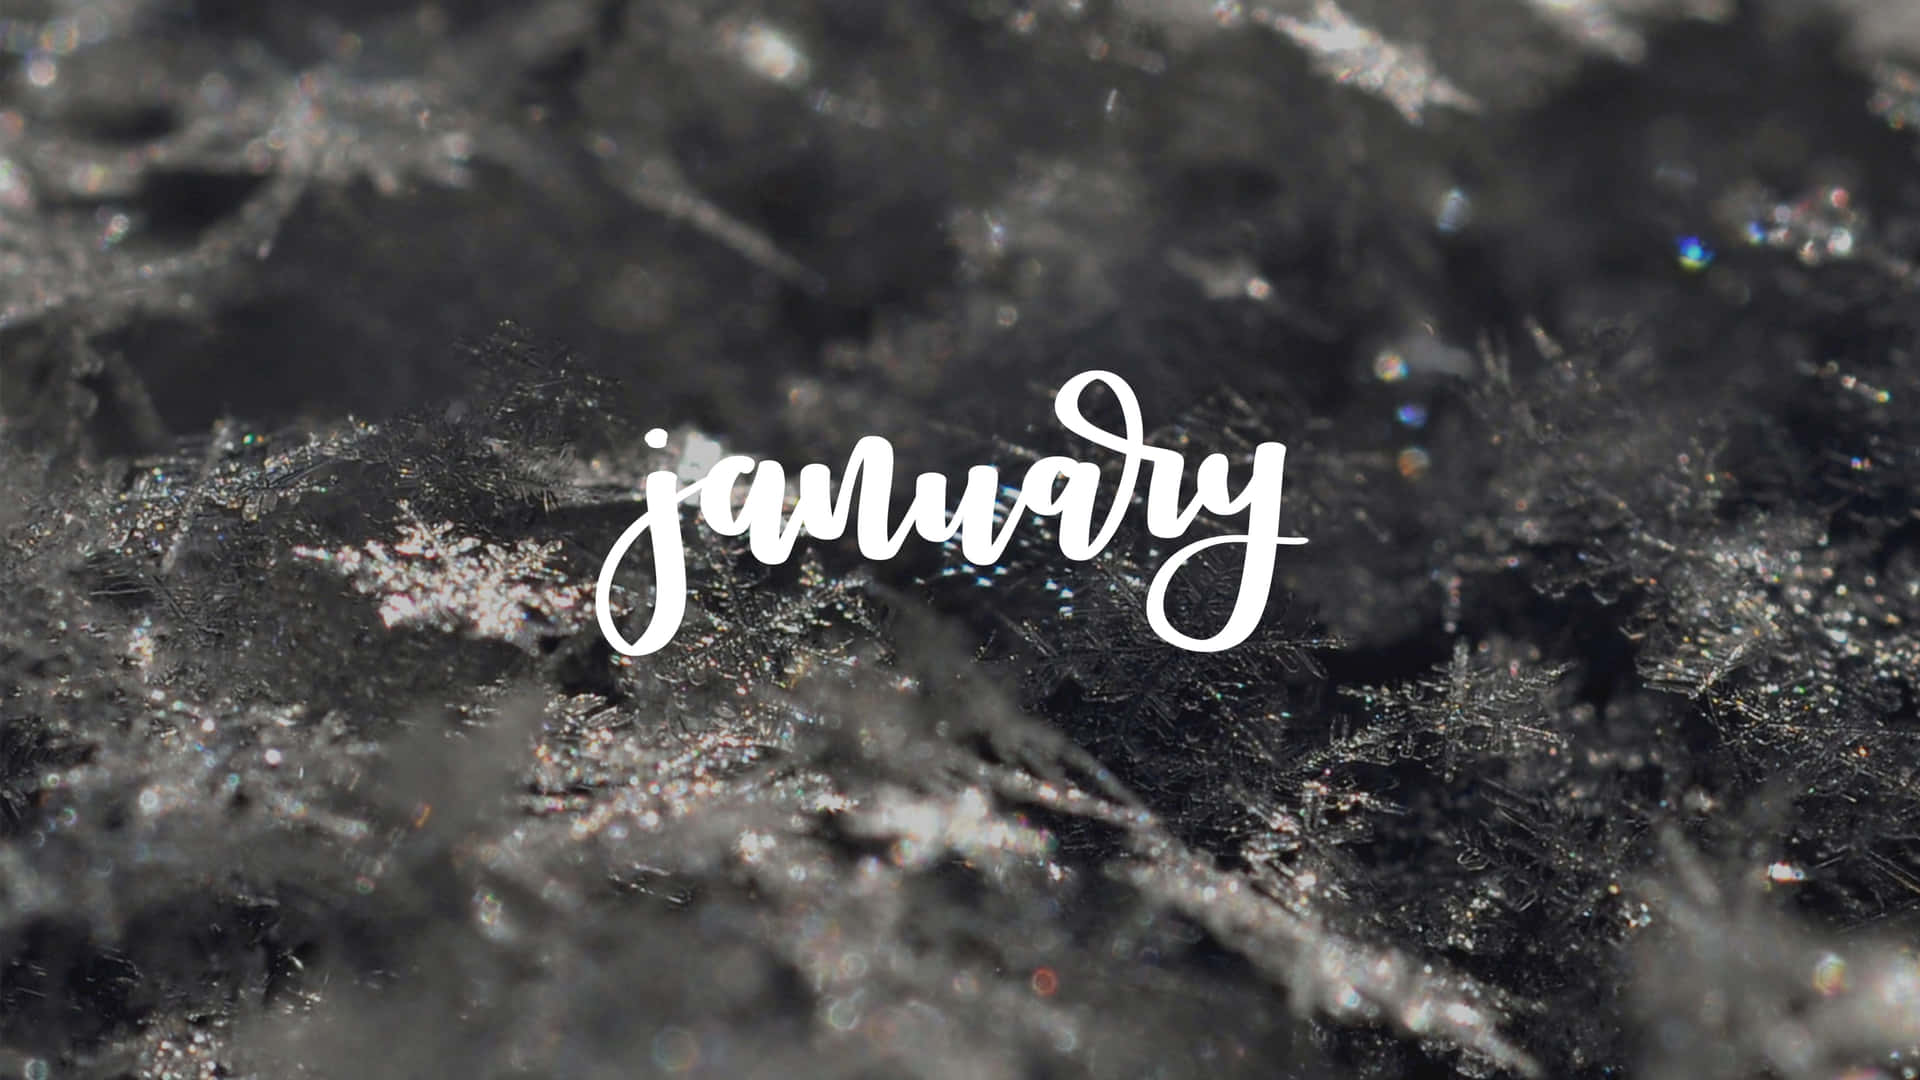 "Welcome to January, the Start of a New Year!" Wallpaper